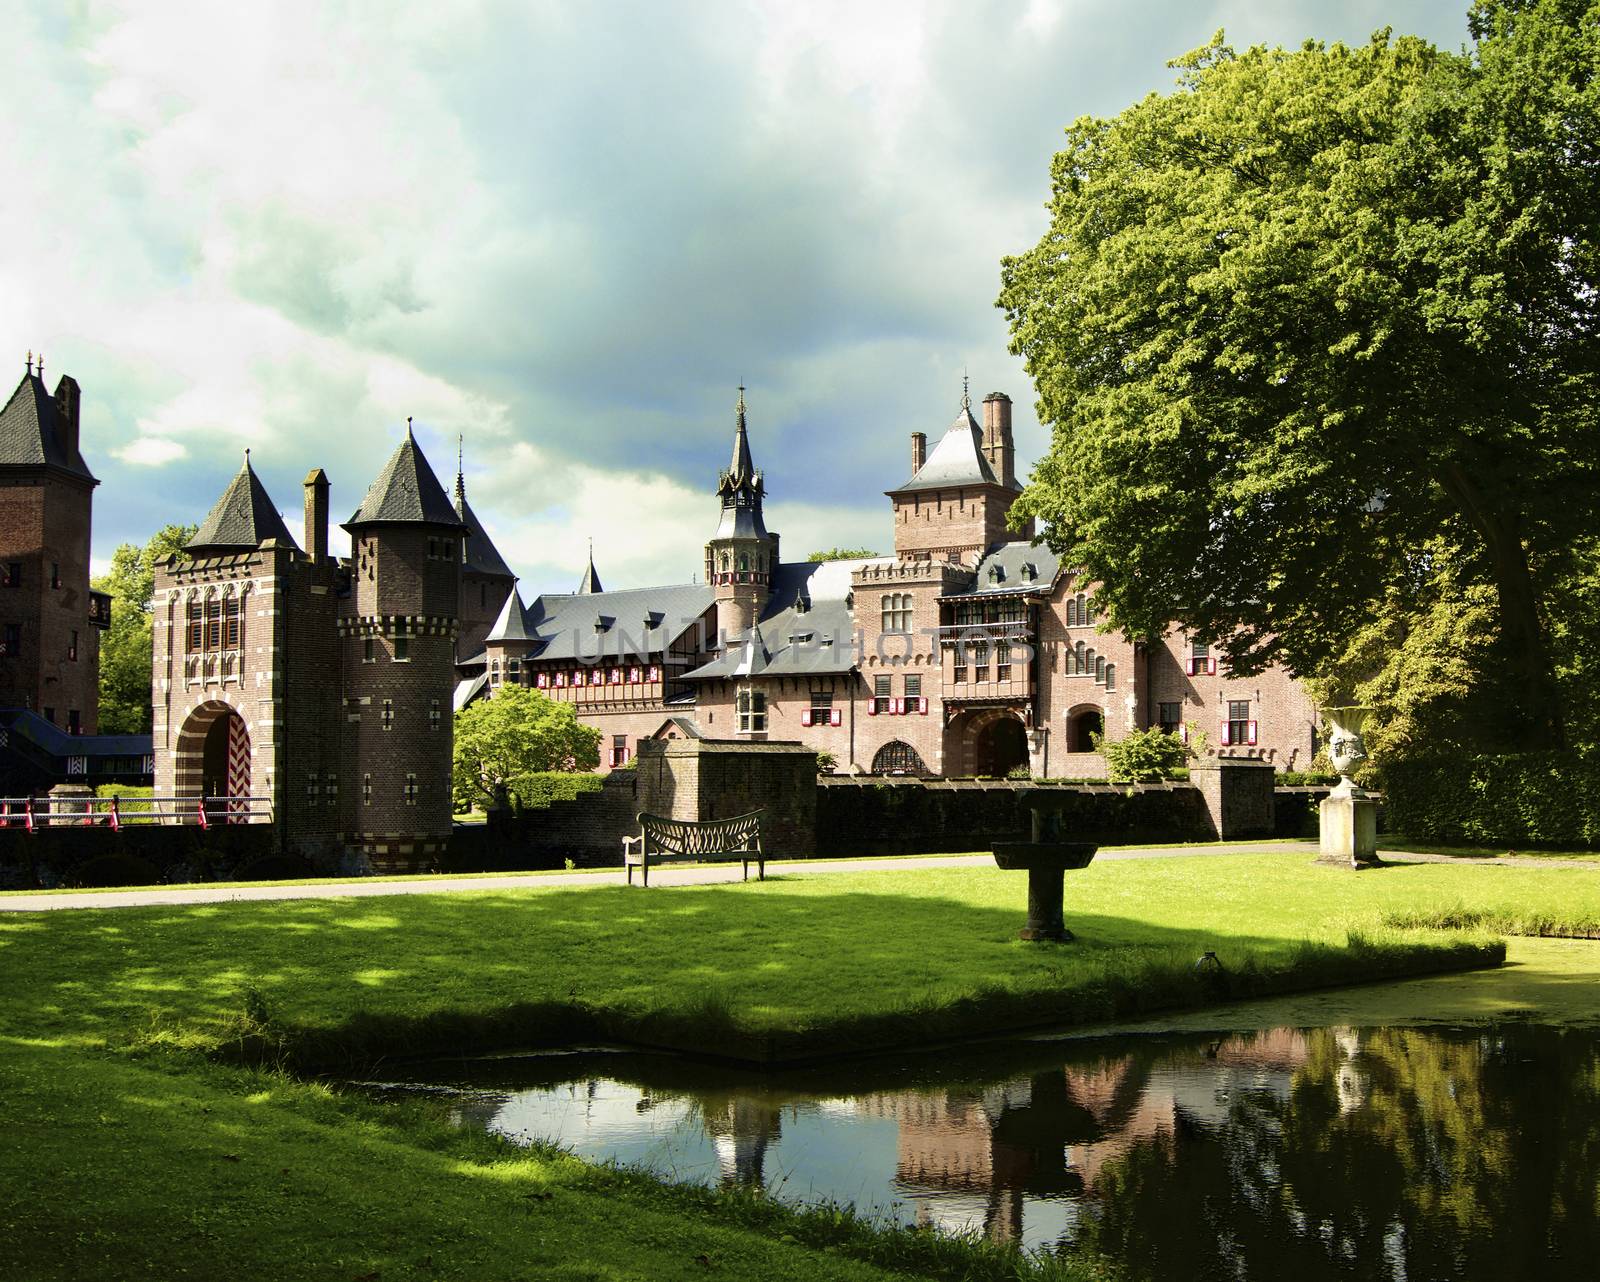 Medieval Castle De Haar from side of Back Yard with Reflection on Pond against Cloudy Sky Outdoors. Utrecht, Netherlands